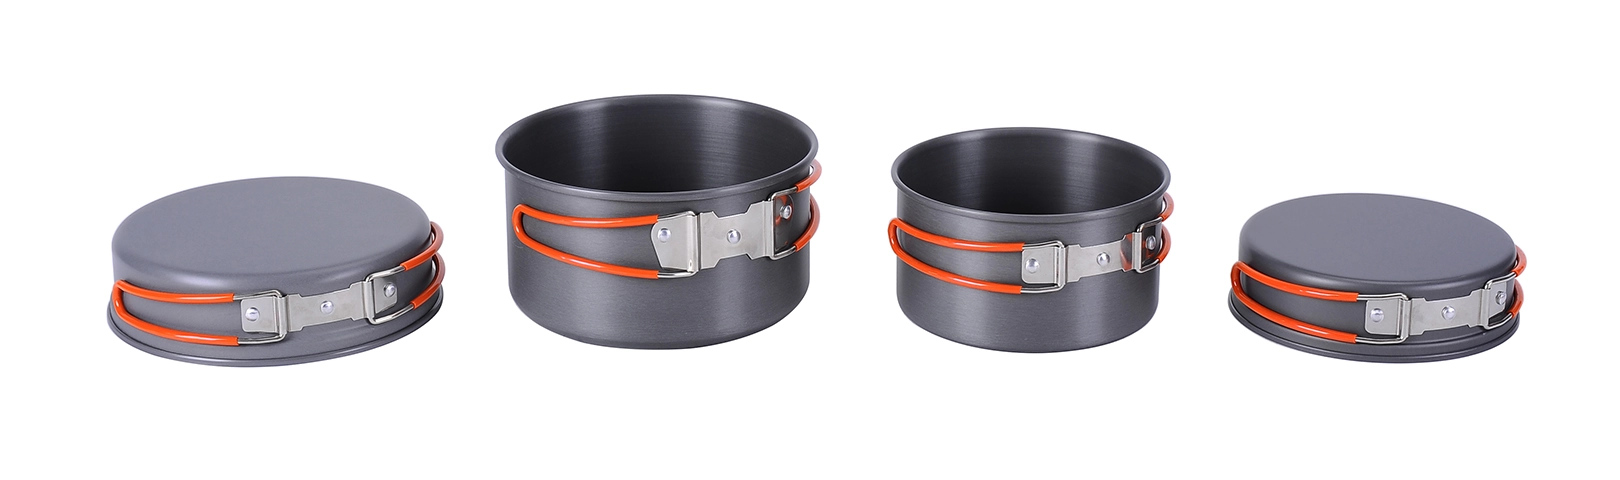 details of DUO Cookware Set for Hiking